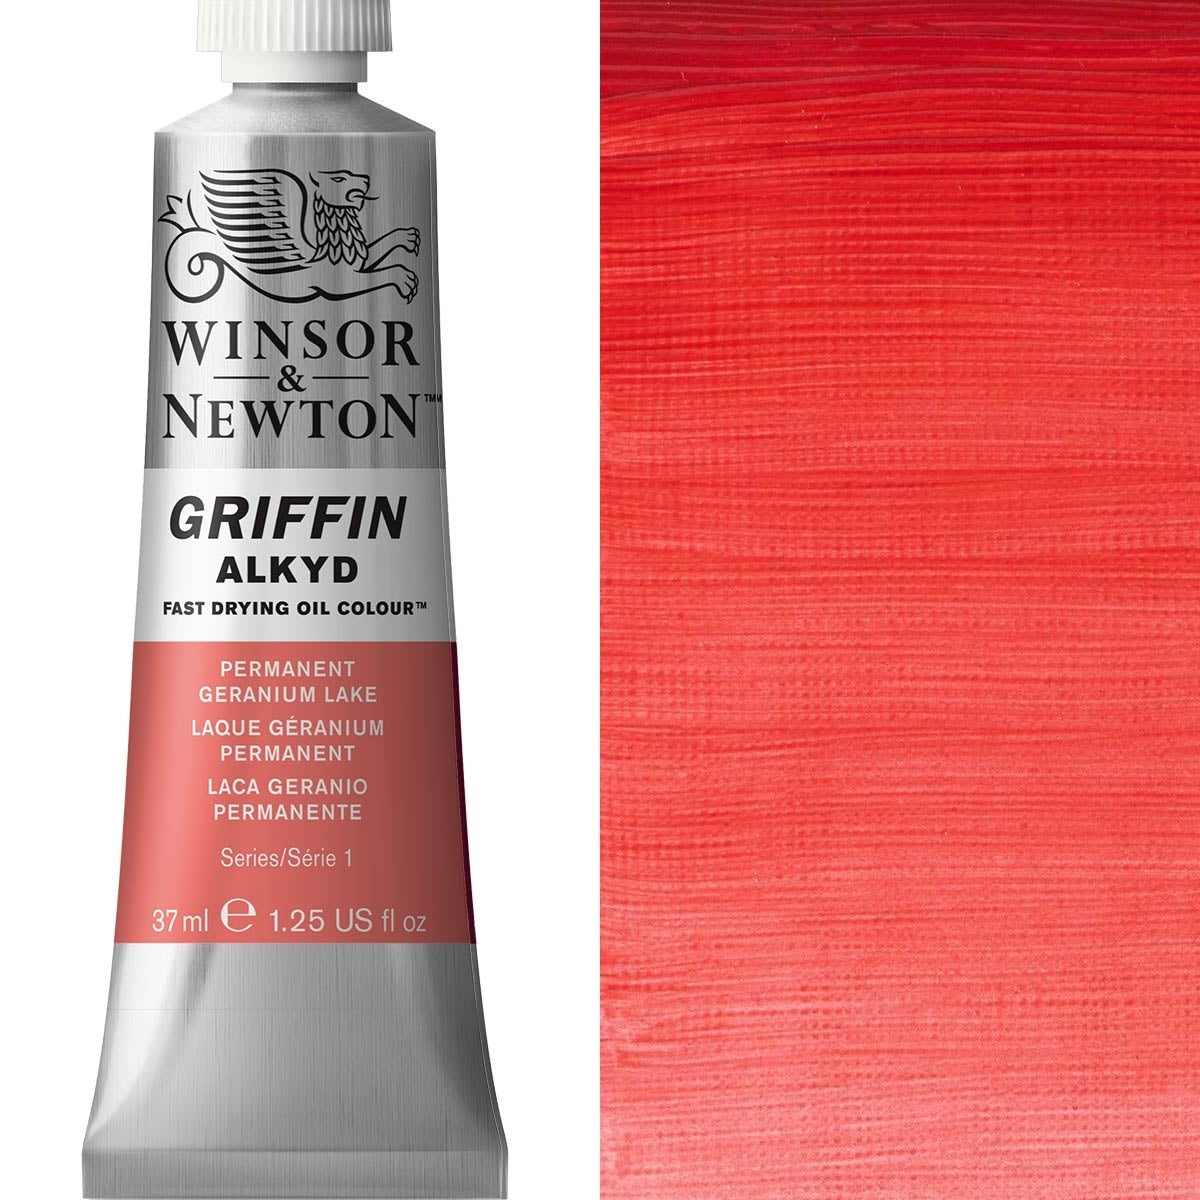 Winsor and Newton - Griffin ALKYD Oil Colour - 37ml - Permanent Geranium Lake